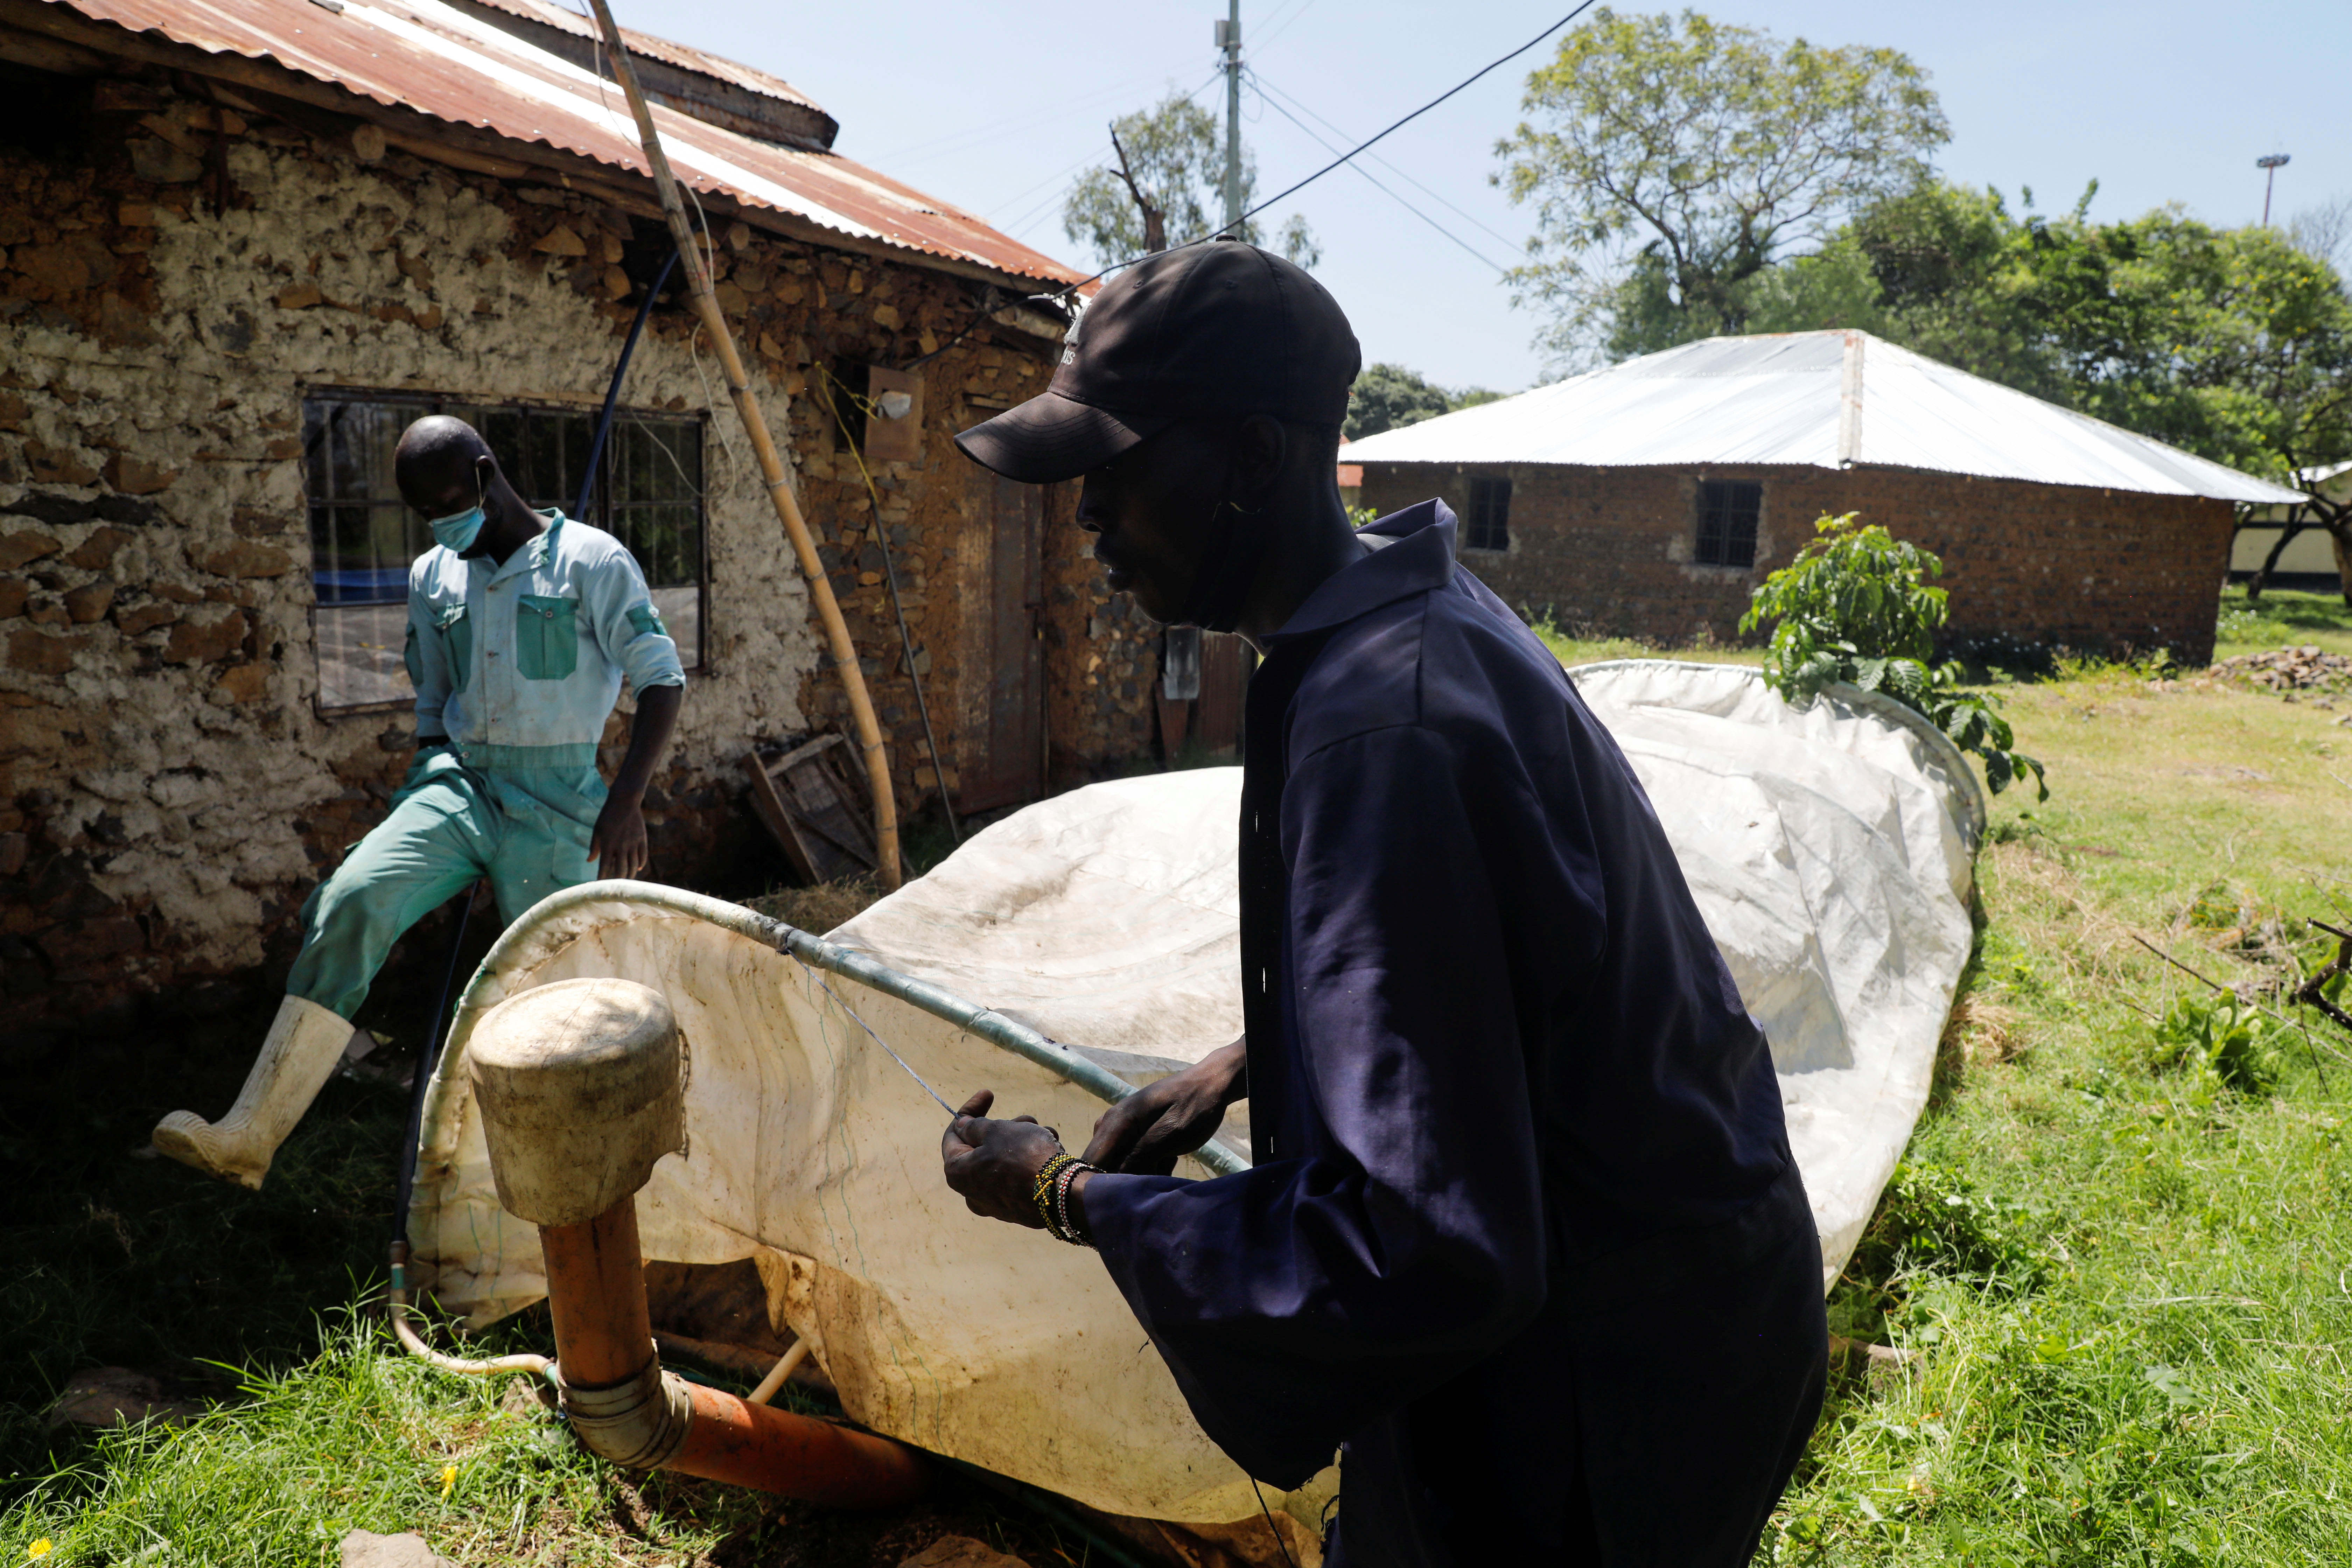 Entrepreneur and his team convert water hyacinth into biogas, near the town of Kisumu